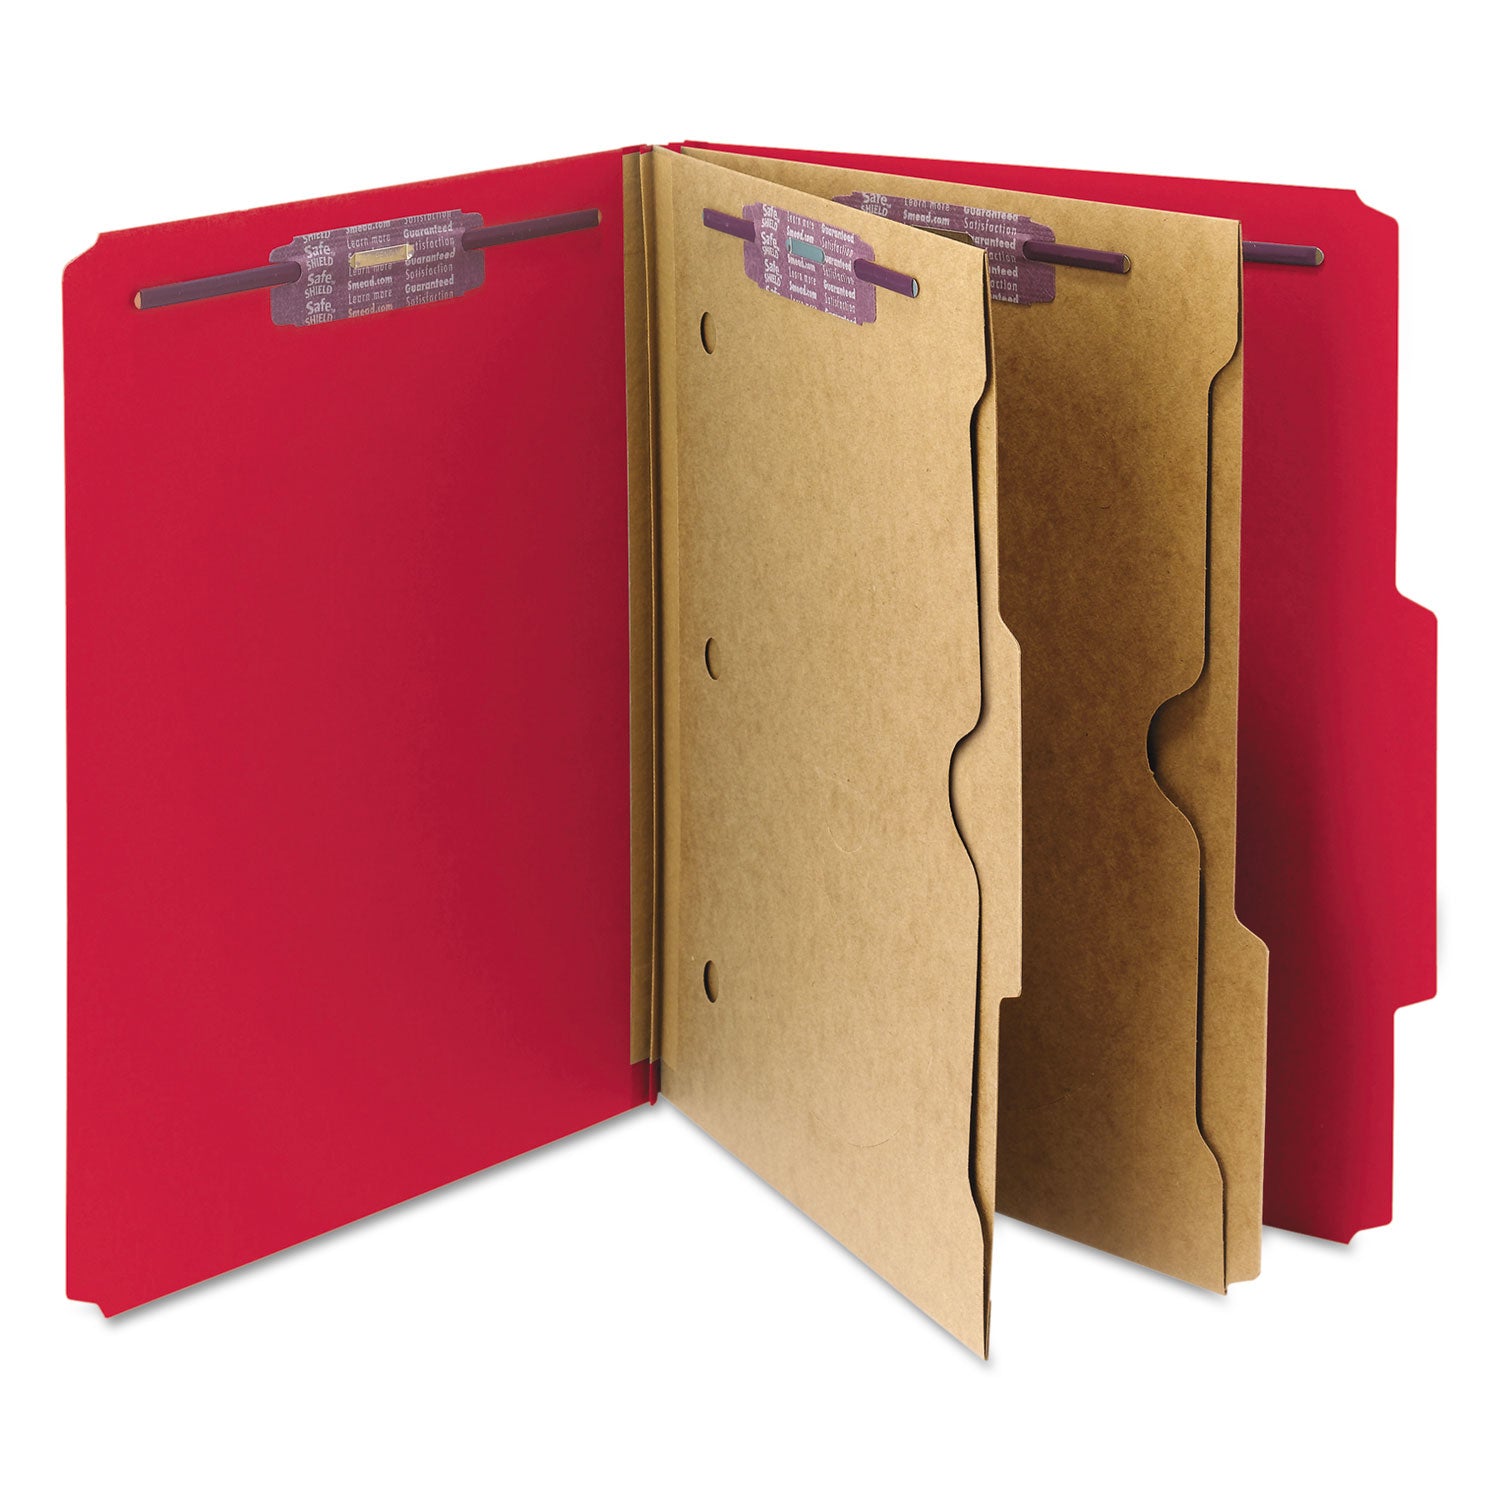 6-Section Pressboard Top Tab Pocket Classification Folders, 6 SafeSHIELD Fasteners, 2 Dividers, Letter Size, Bright Red,10/BX - 